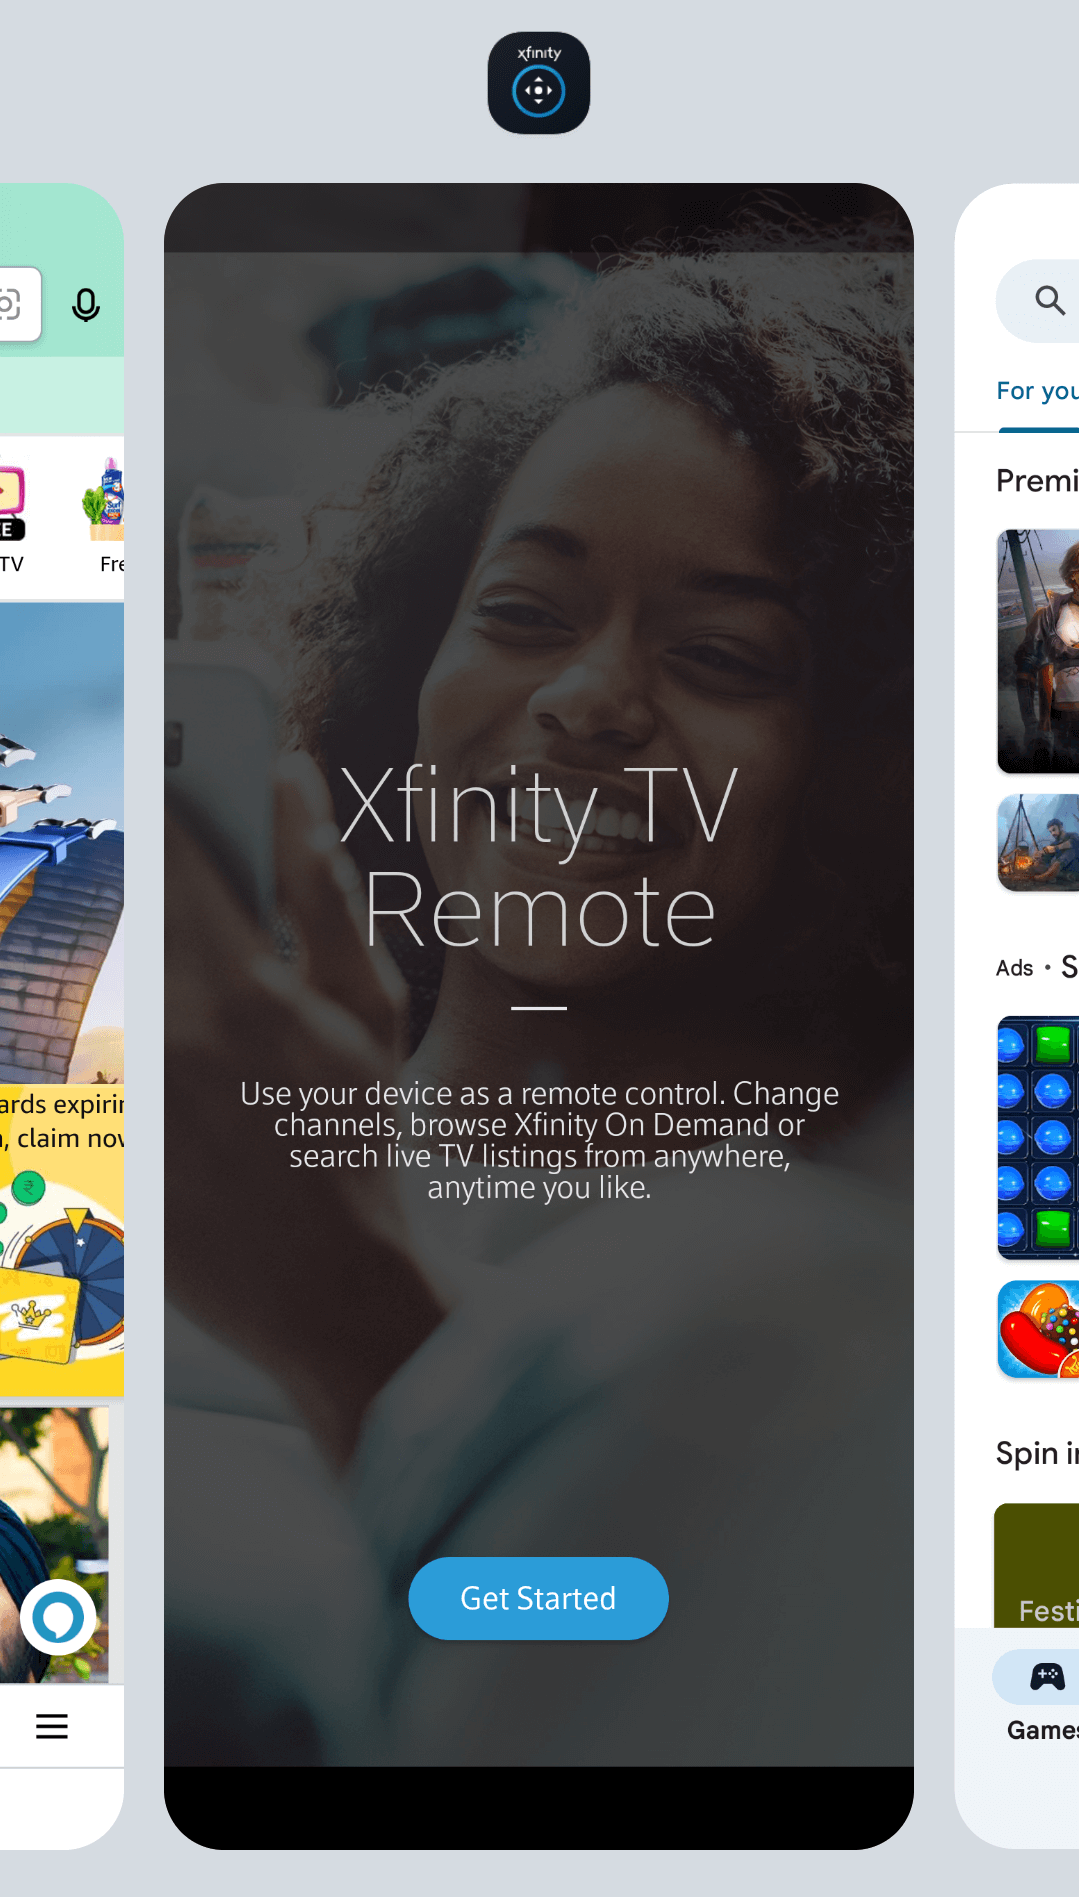 Force close the Xfinity TV Remote App